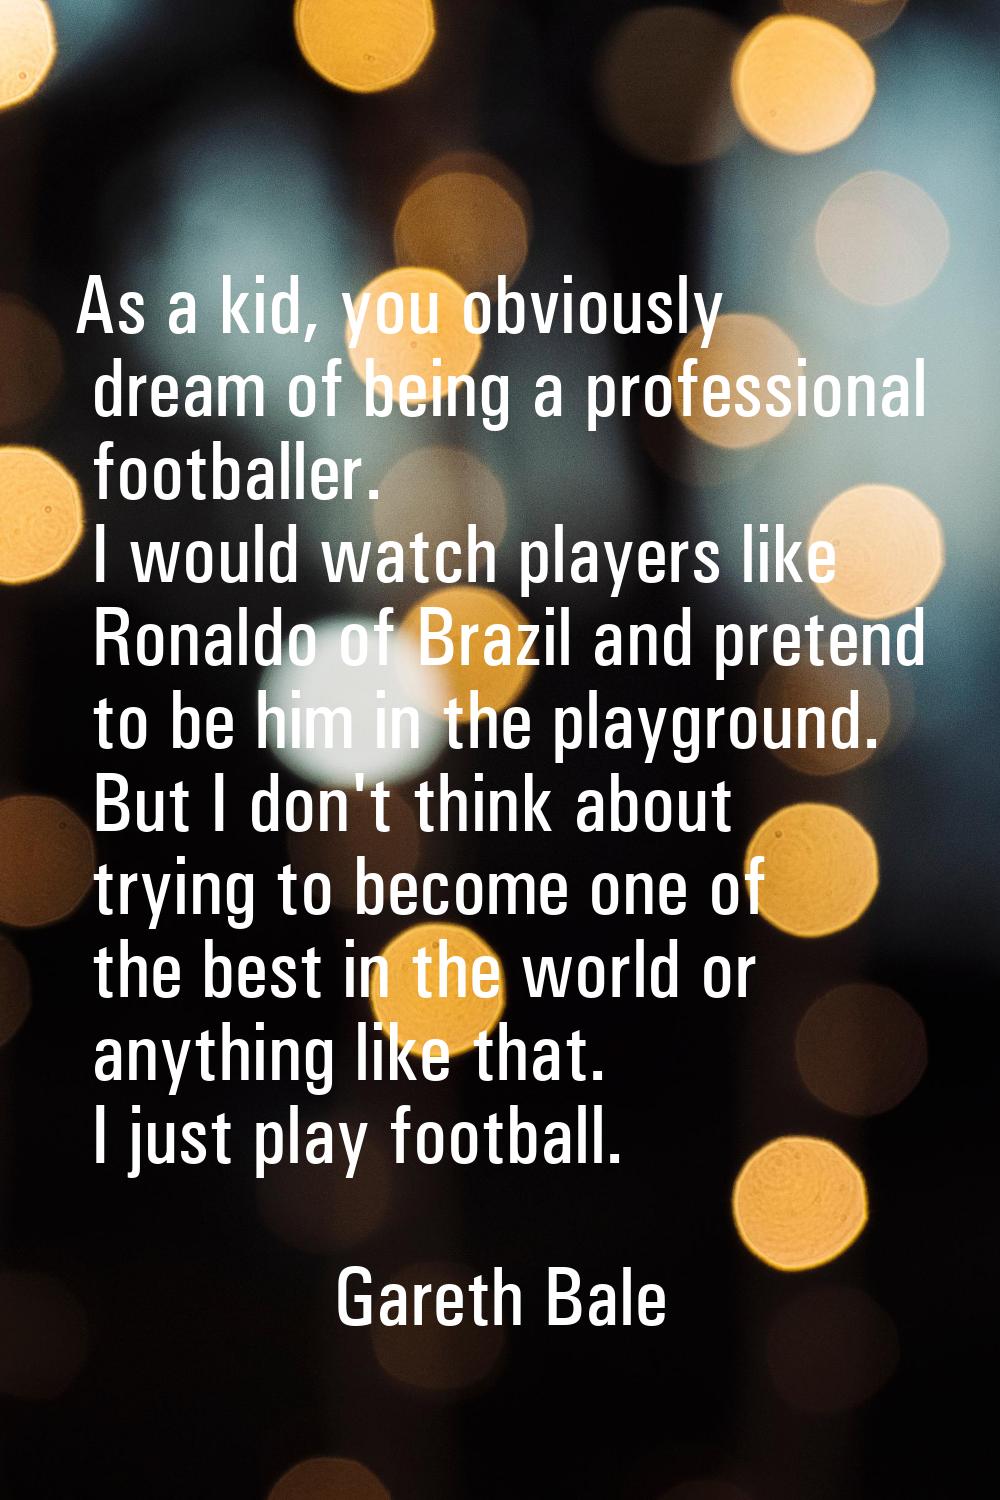 As a kid, you obviously dream of being a professional footballer. I would watch players like Ronald